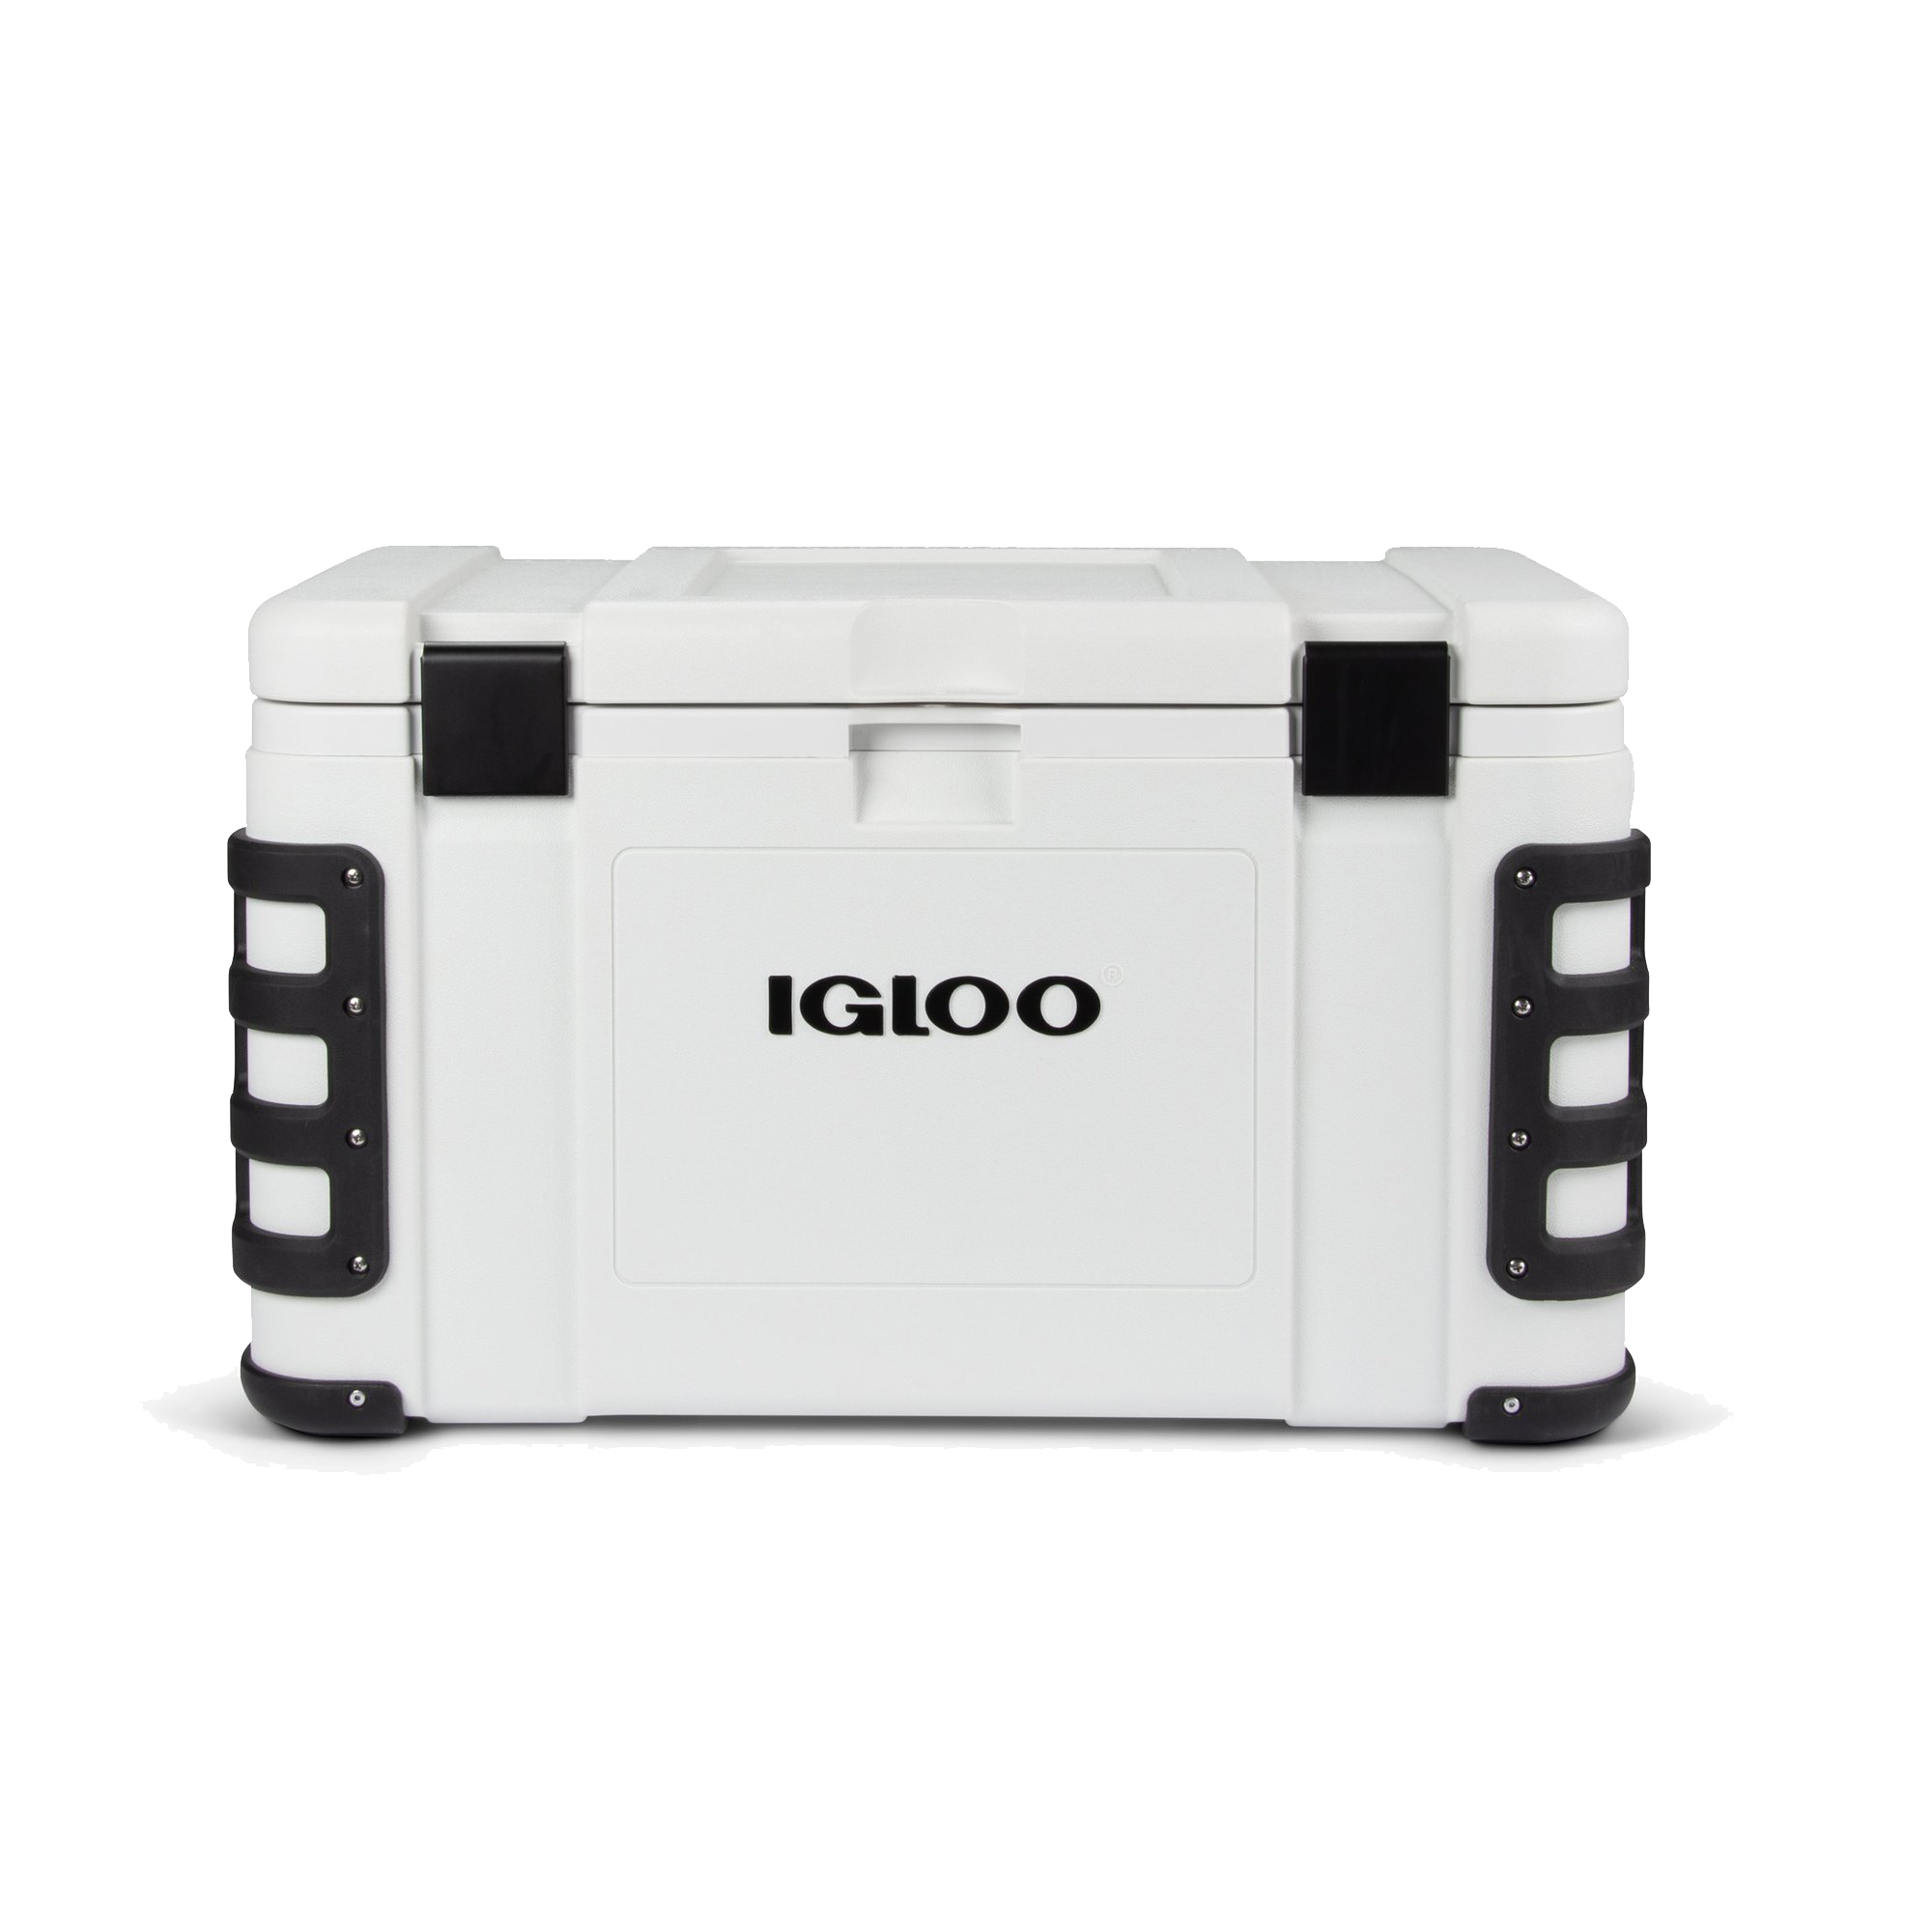 Igloo 50 qt. Hard Sided Ice Chest Cooler, White - image 2 of 8